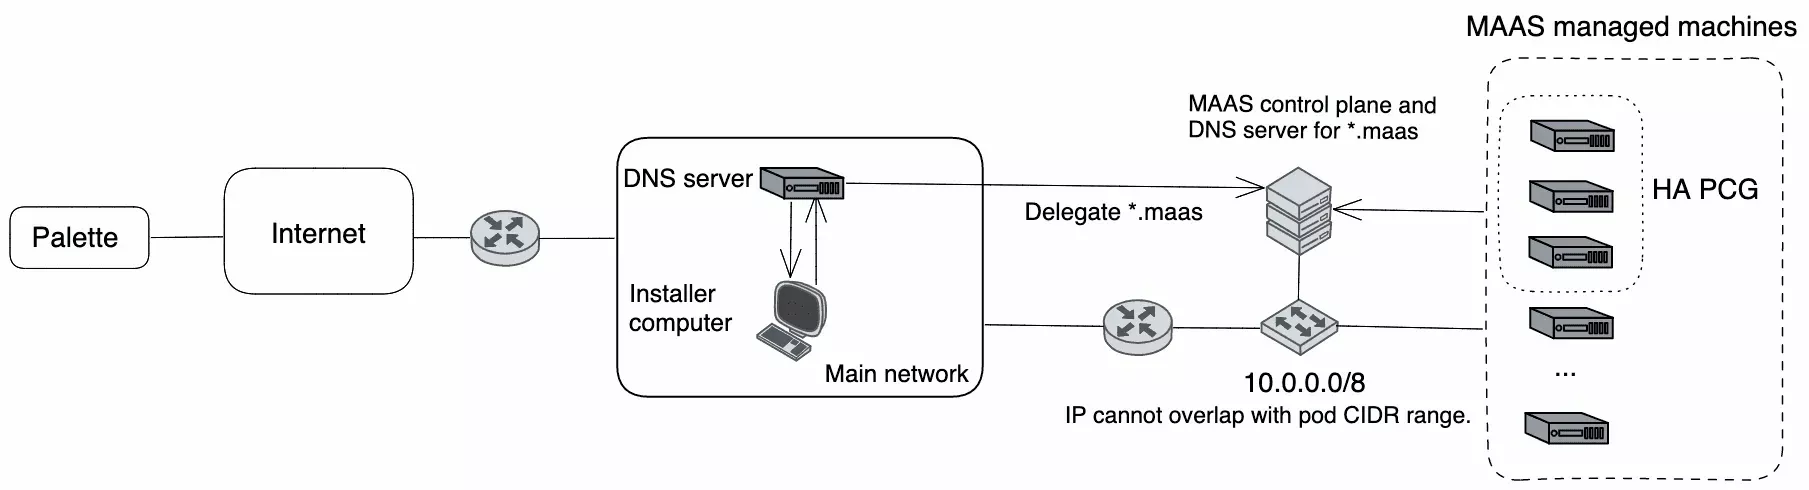 Image showing external DNS server machines that MAAS deploys in addition to a DNS delegation